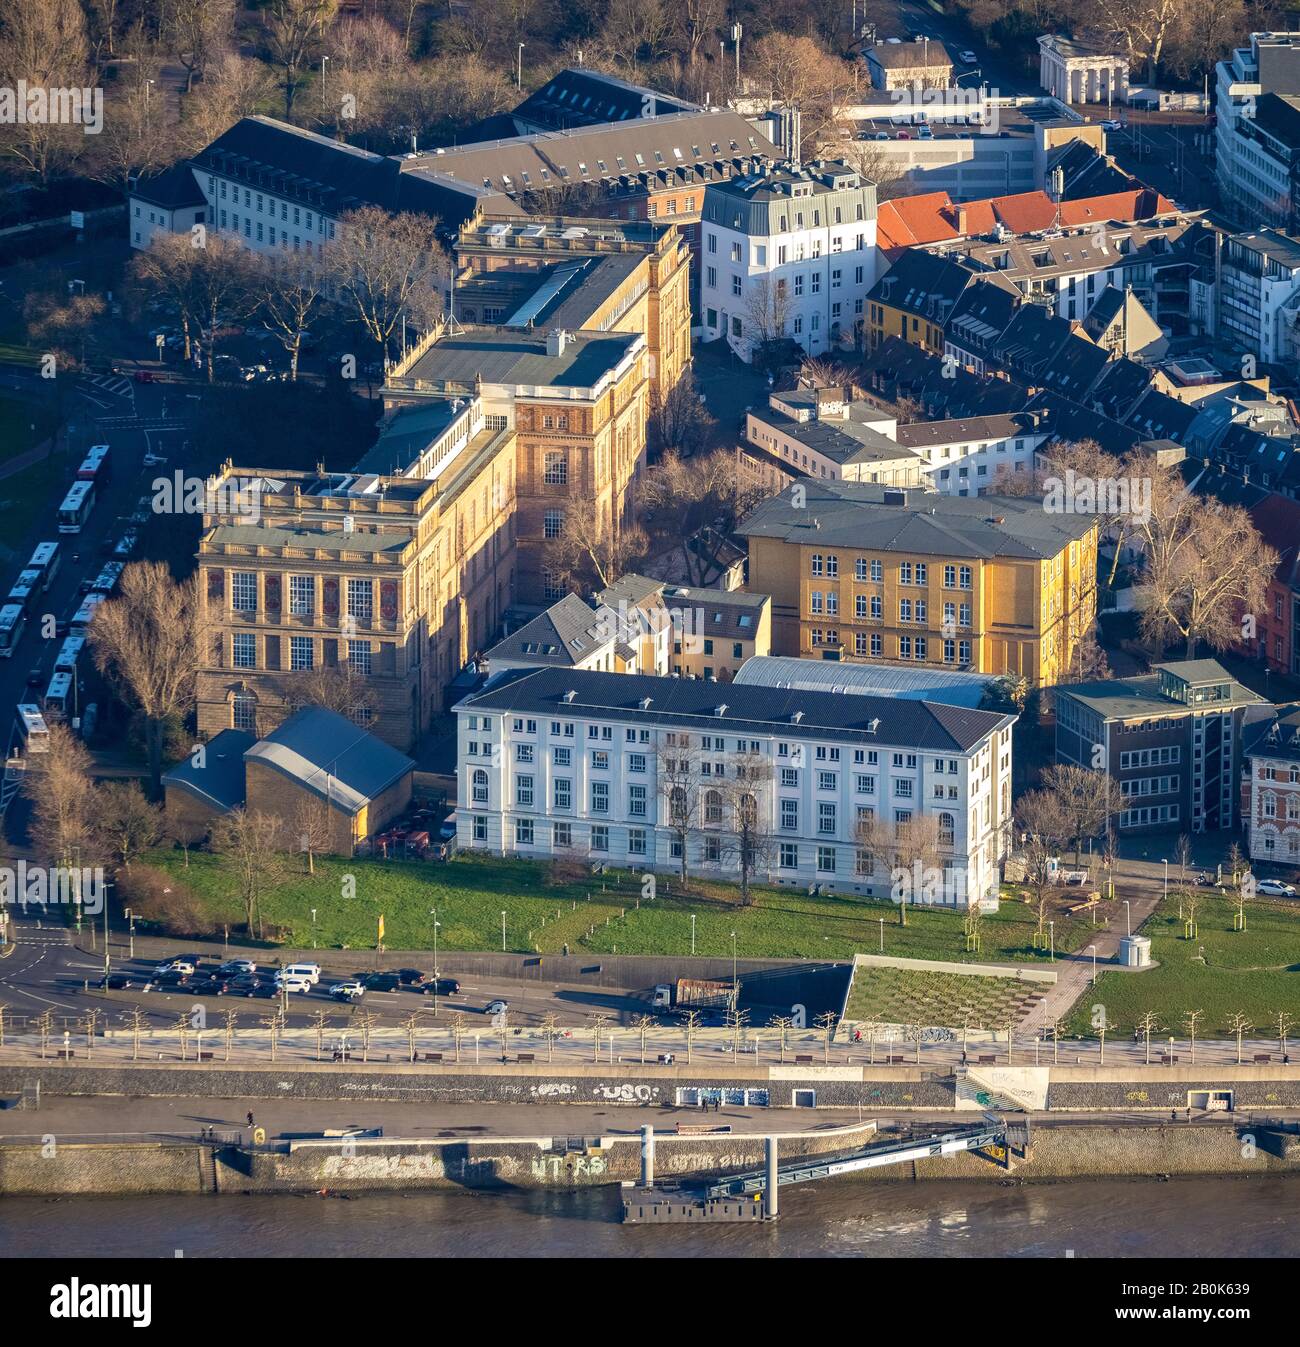 Aerial photograph, Archdiocese of Cologne General Vicariate, Art Academy Düsseldorf, St. Ursula Vocational College of the Archdiocese of Cologne, Publ Stock Photo